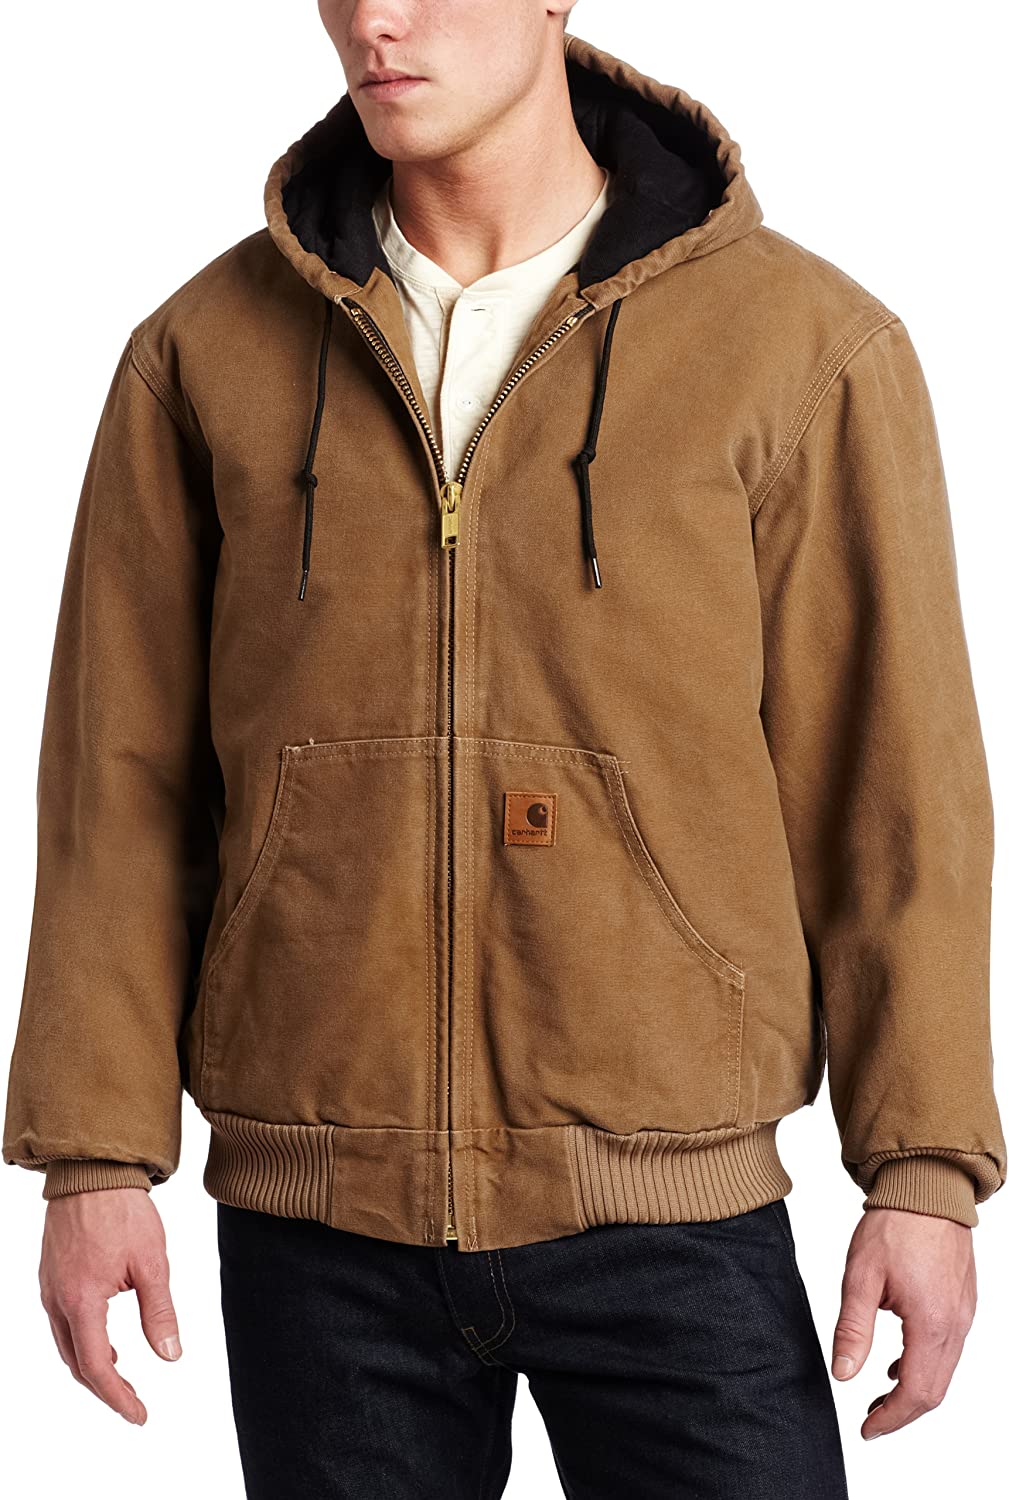 Carhartt Mens Big & Tall Quilted Flannel-Lined Sandstone Active Jacket J130 